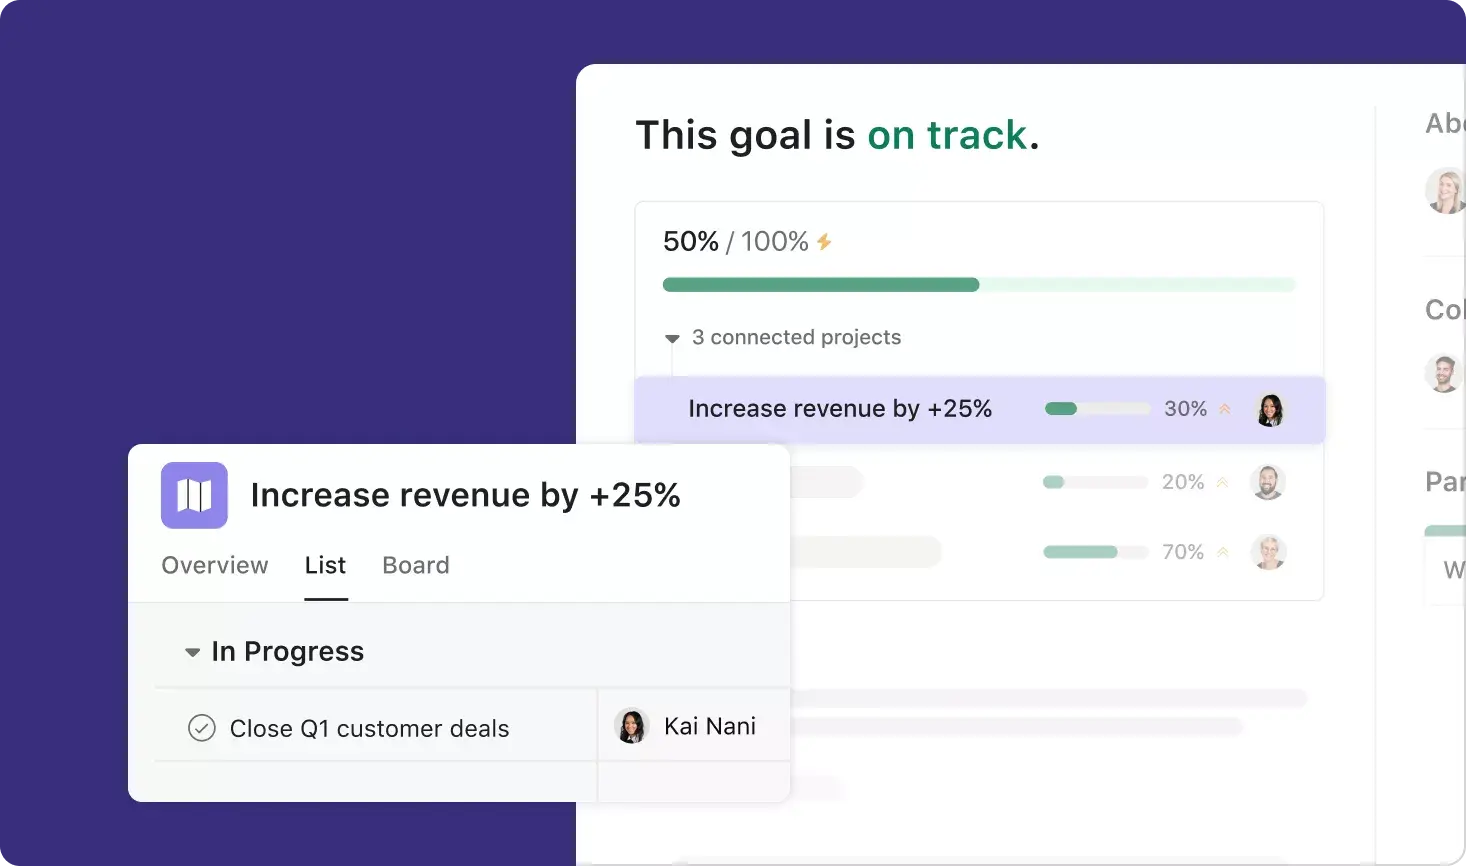 Set and track goals across your organization